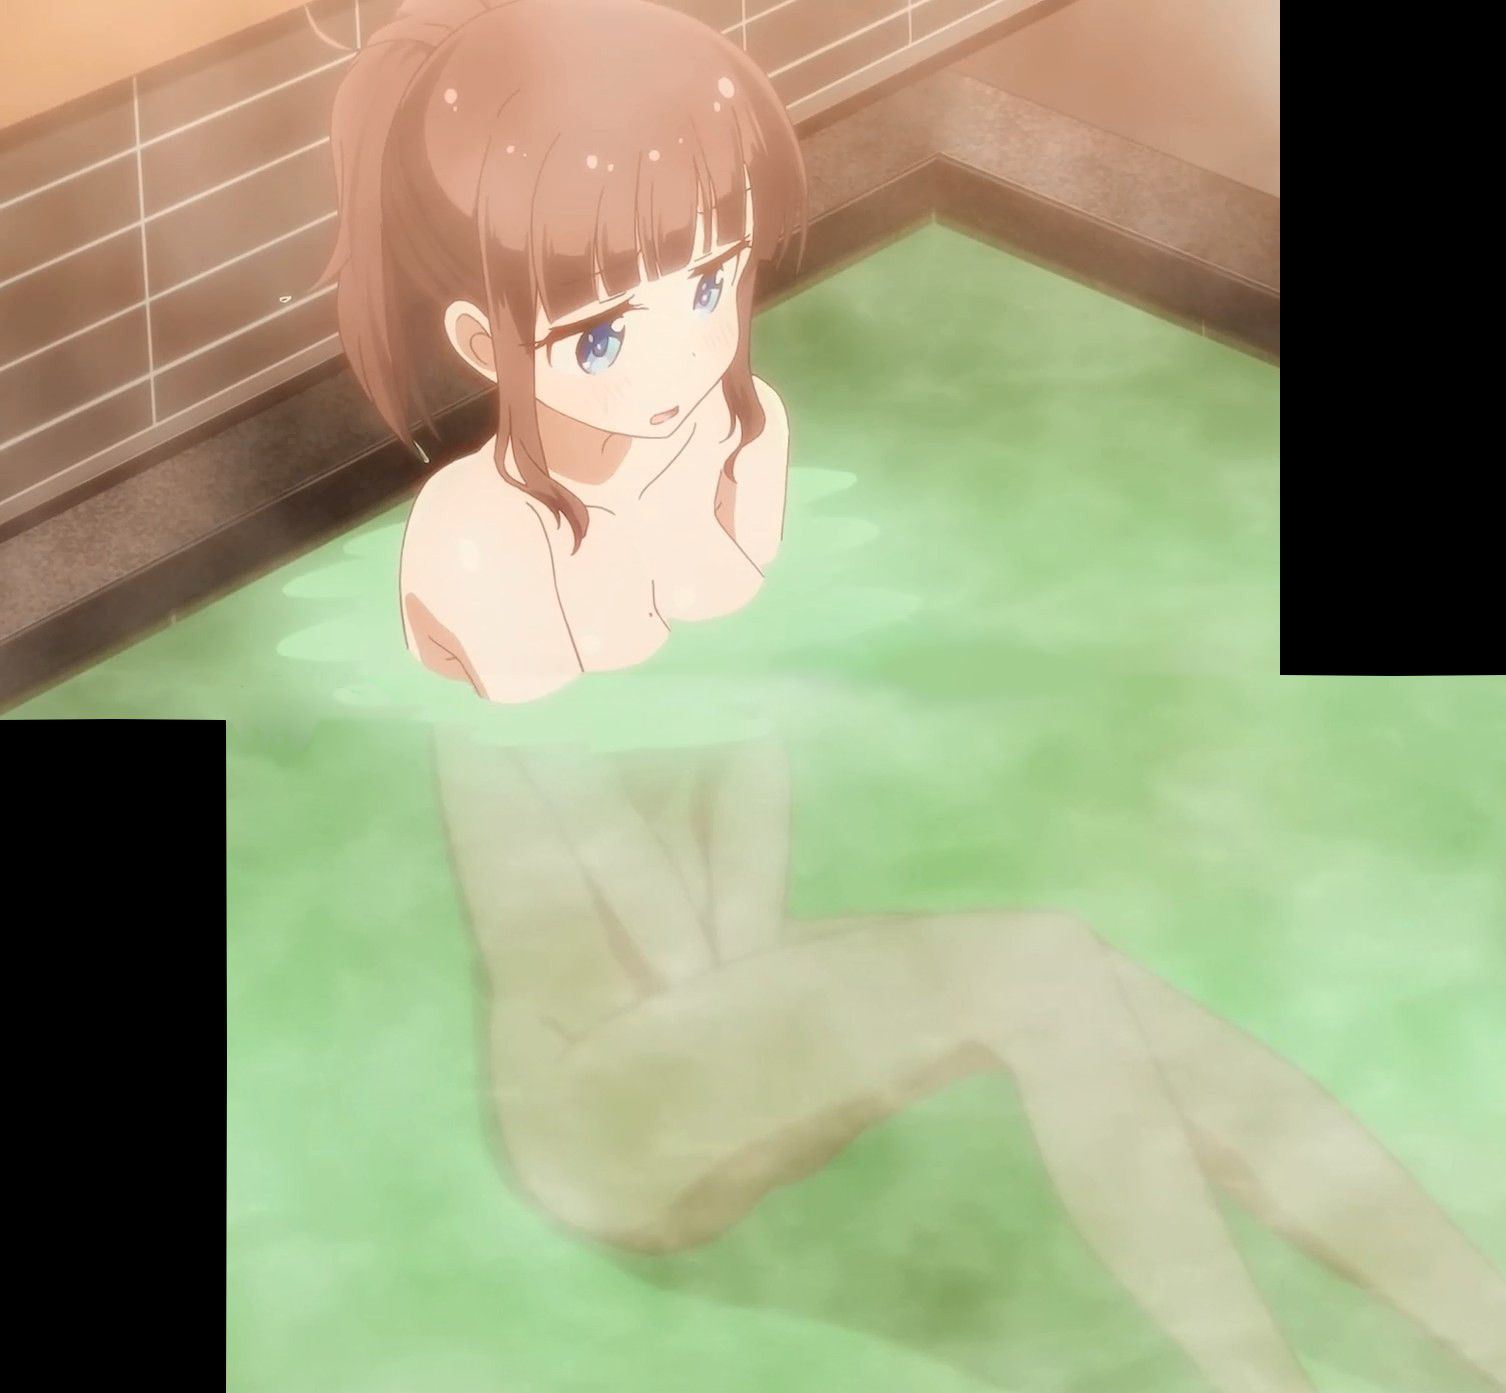 [Artificial mouth times] "NEW GAME! "Of all nine episodes, Yuri hifumi nude too たまらな of wwwwwwwww 1